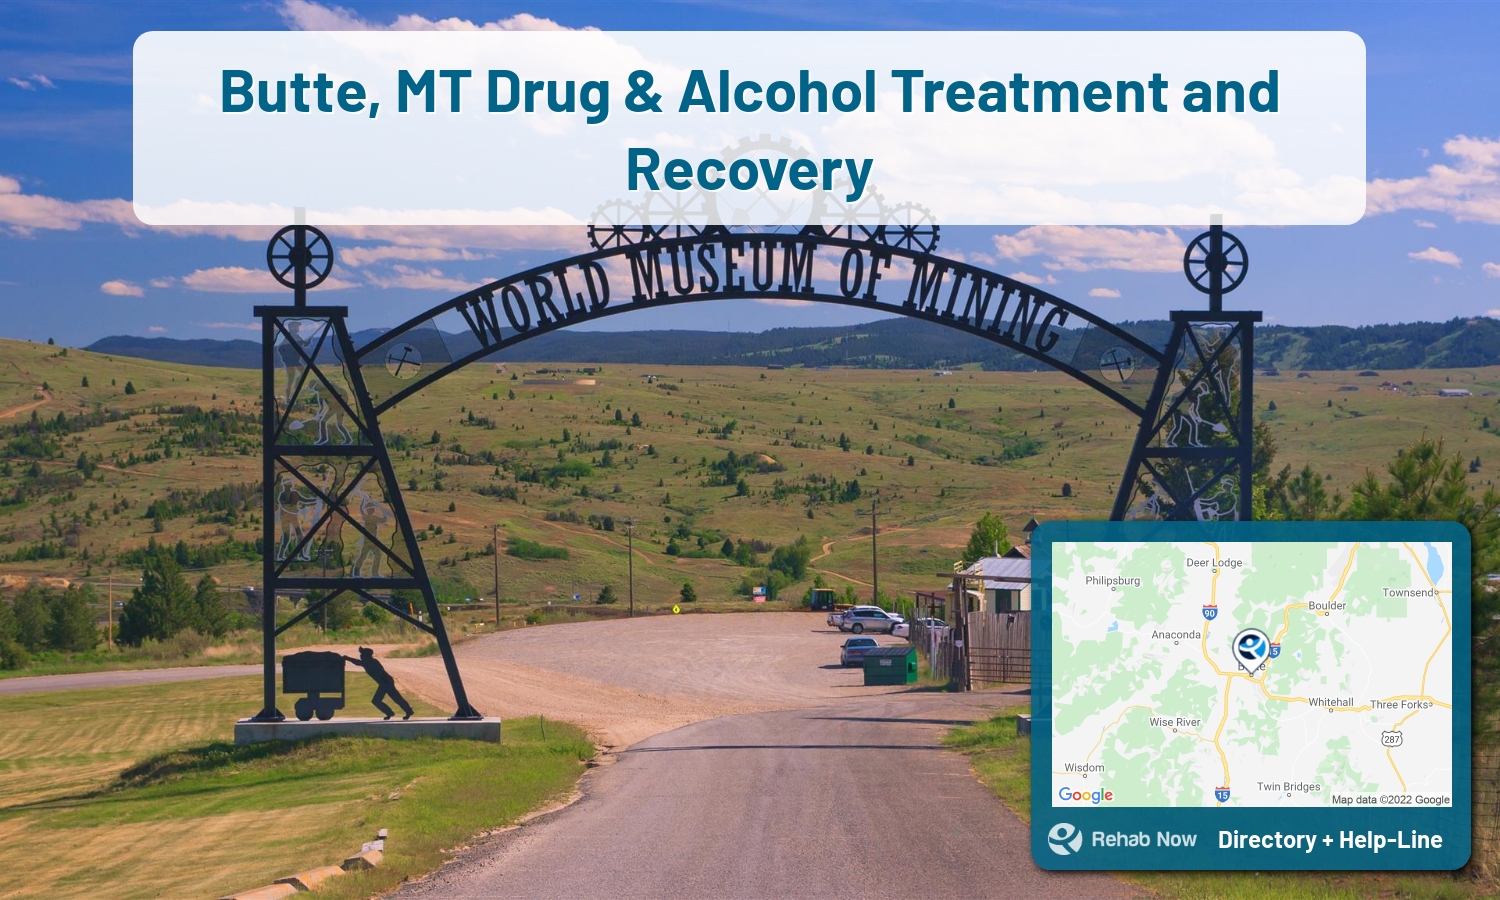 View options, availability, treatment methods, and more, for drug rehab and alcohol treatment in Butte, Montana